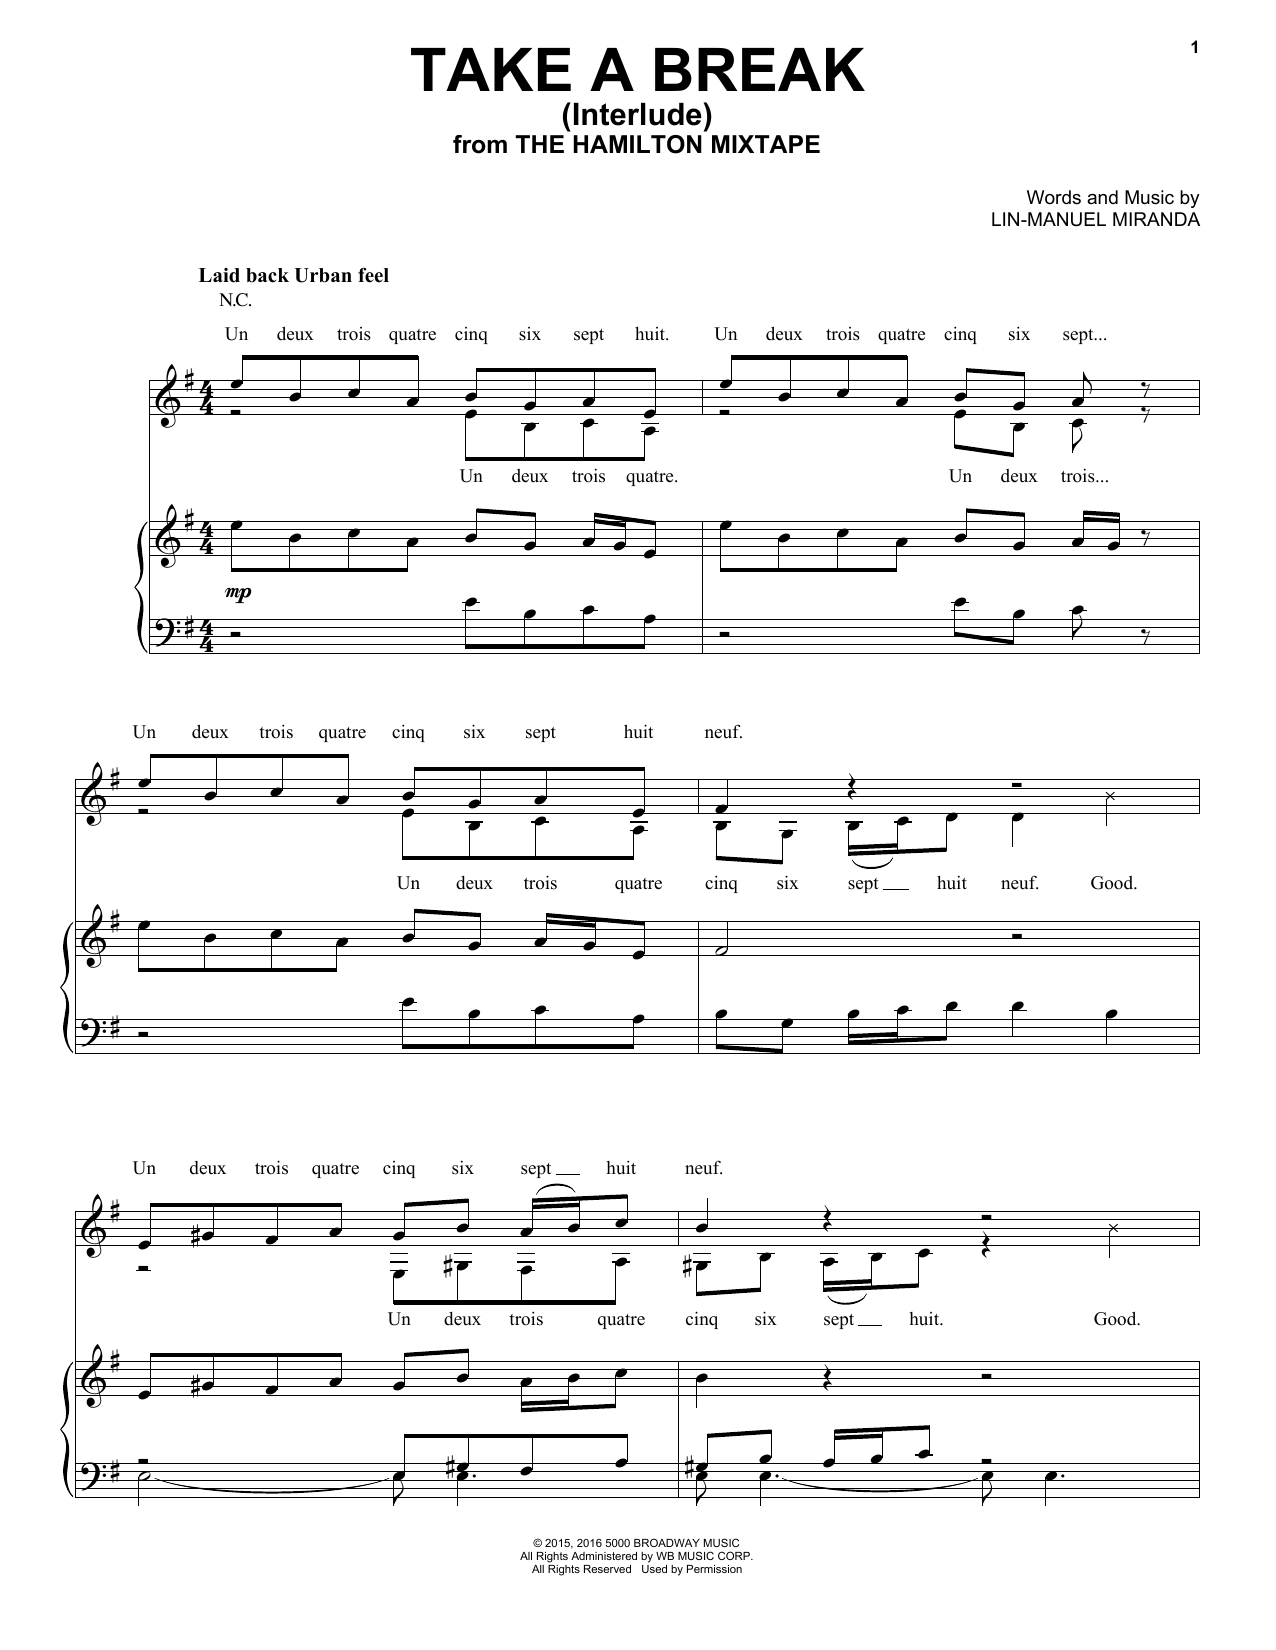 !llmind Take A Break (Interlude) sheet music notes and chords. Download Printable PDF.